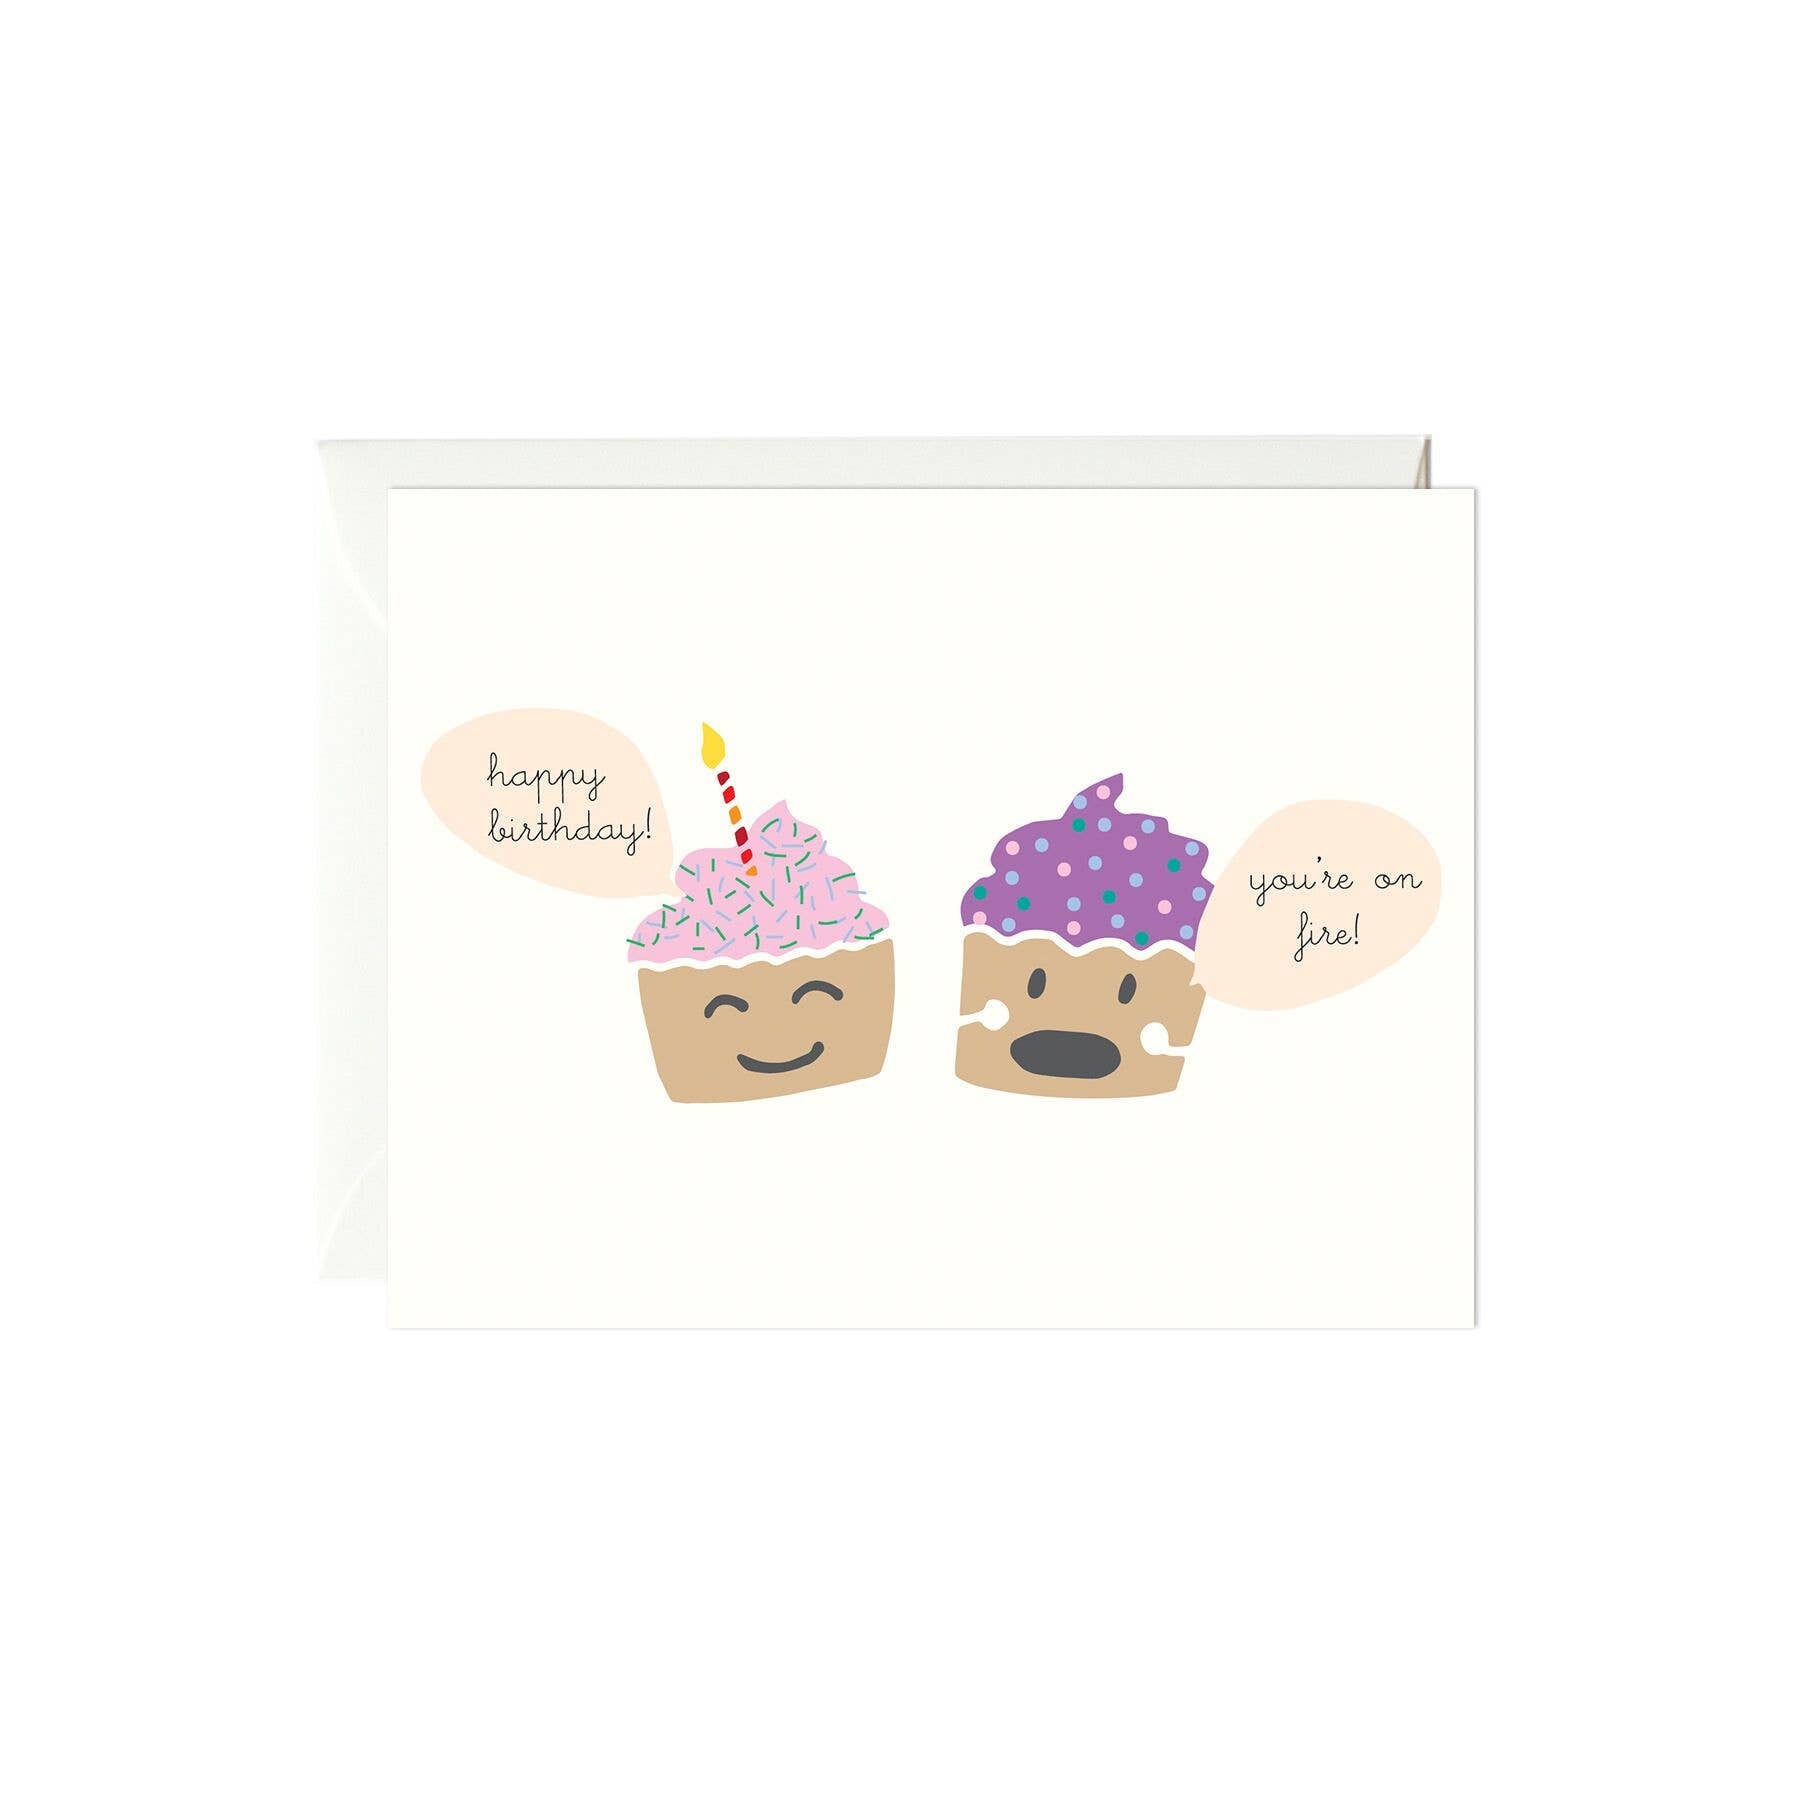 Birthday cupcakes greeting card -- one cupcake with a candle reads "happy birthday" and the other without reads "You're on fire!"